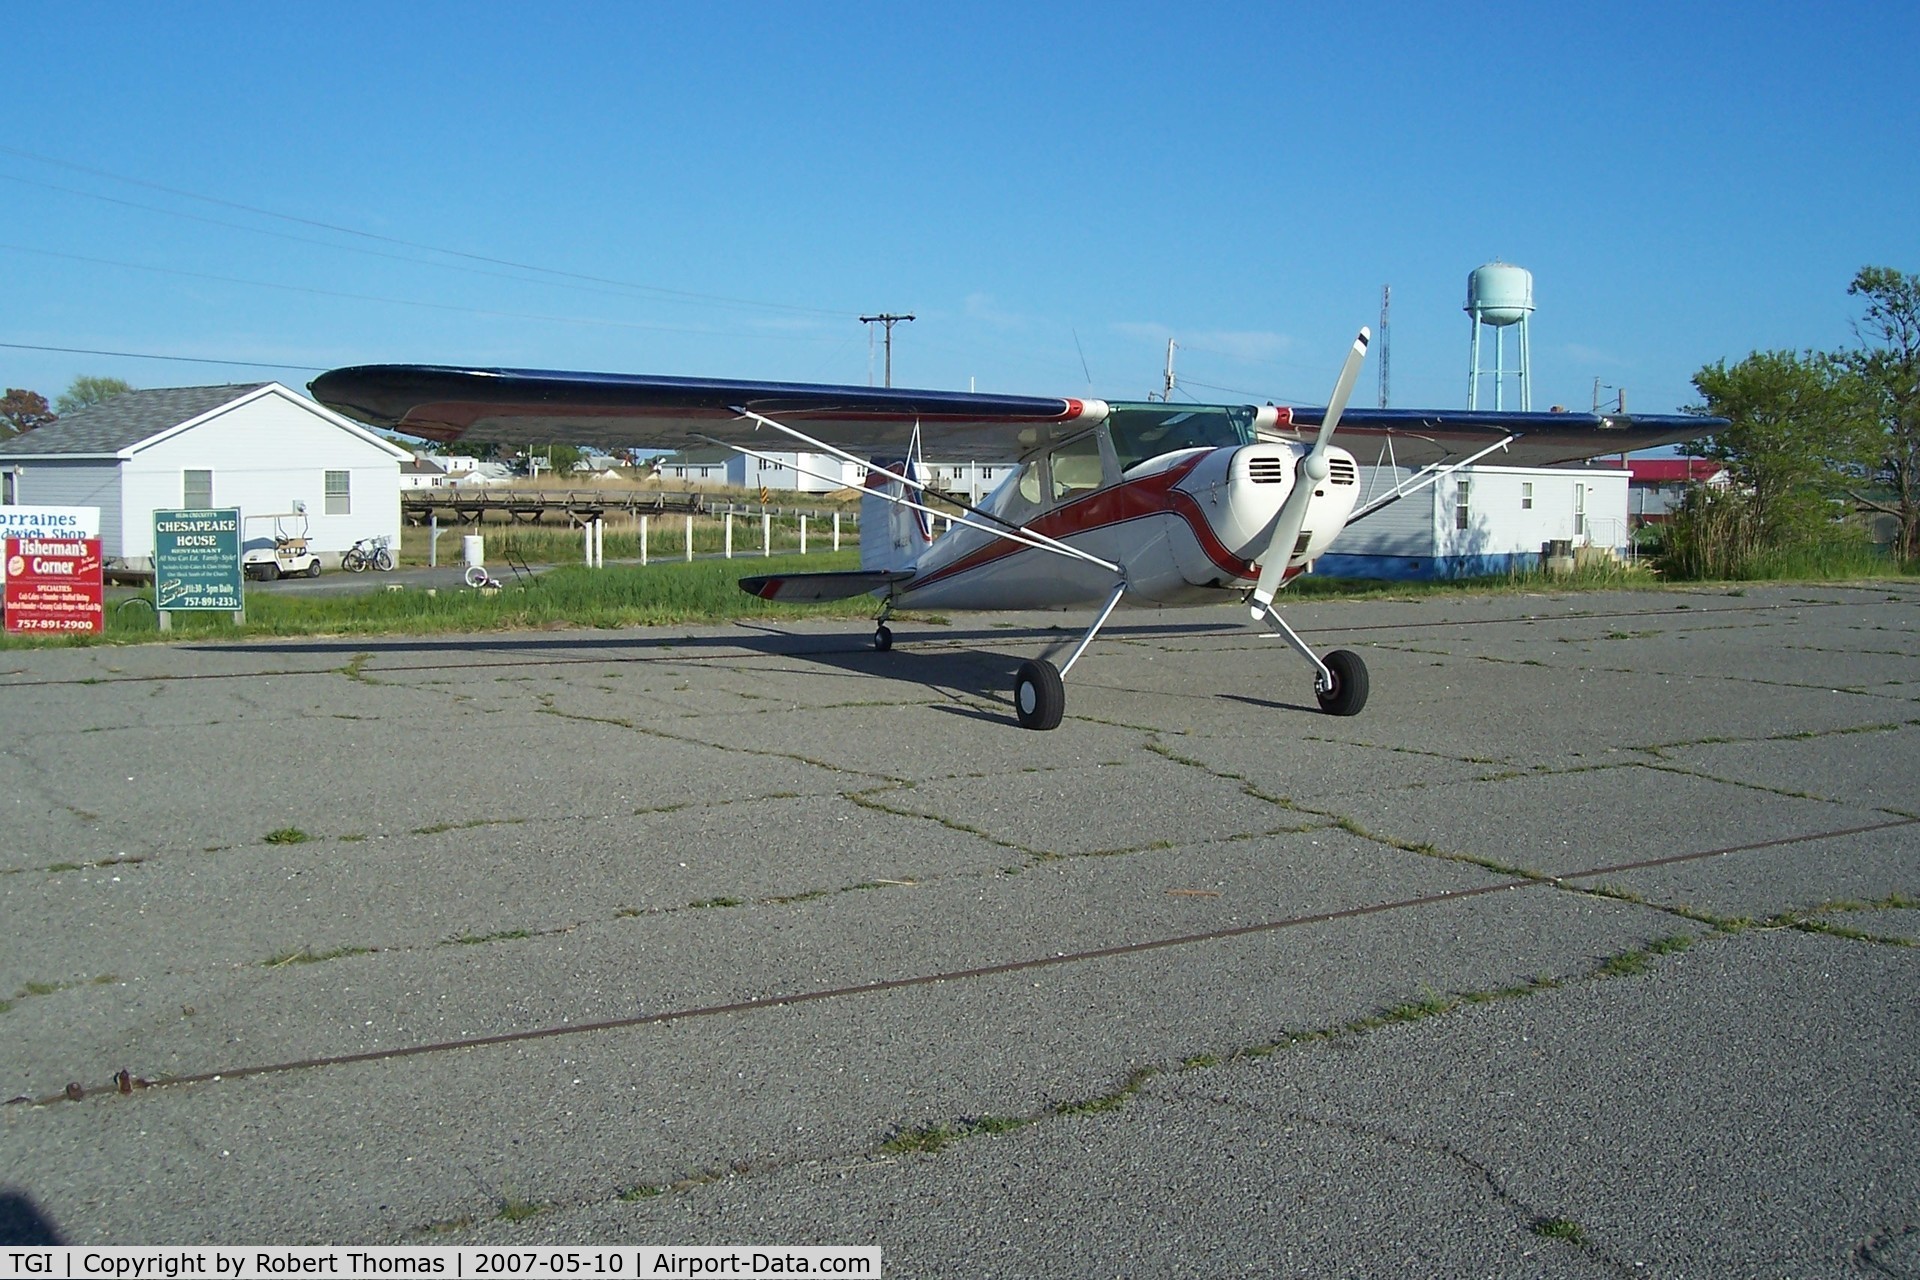 Tangier Island Airport (TGI) - C140 at the edge of parking lot.